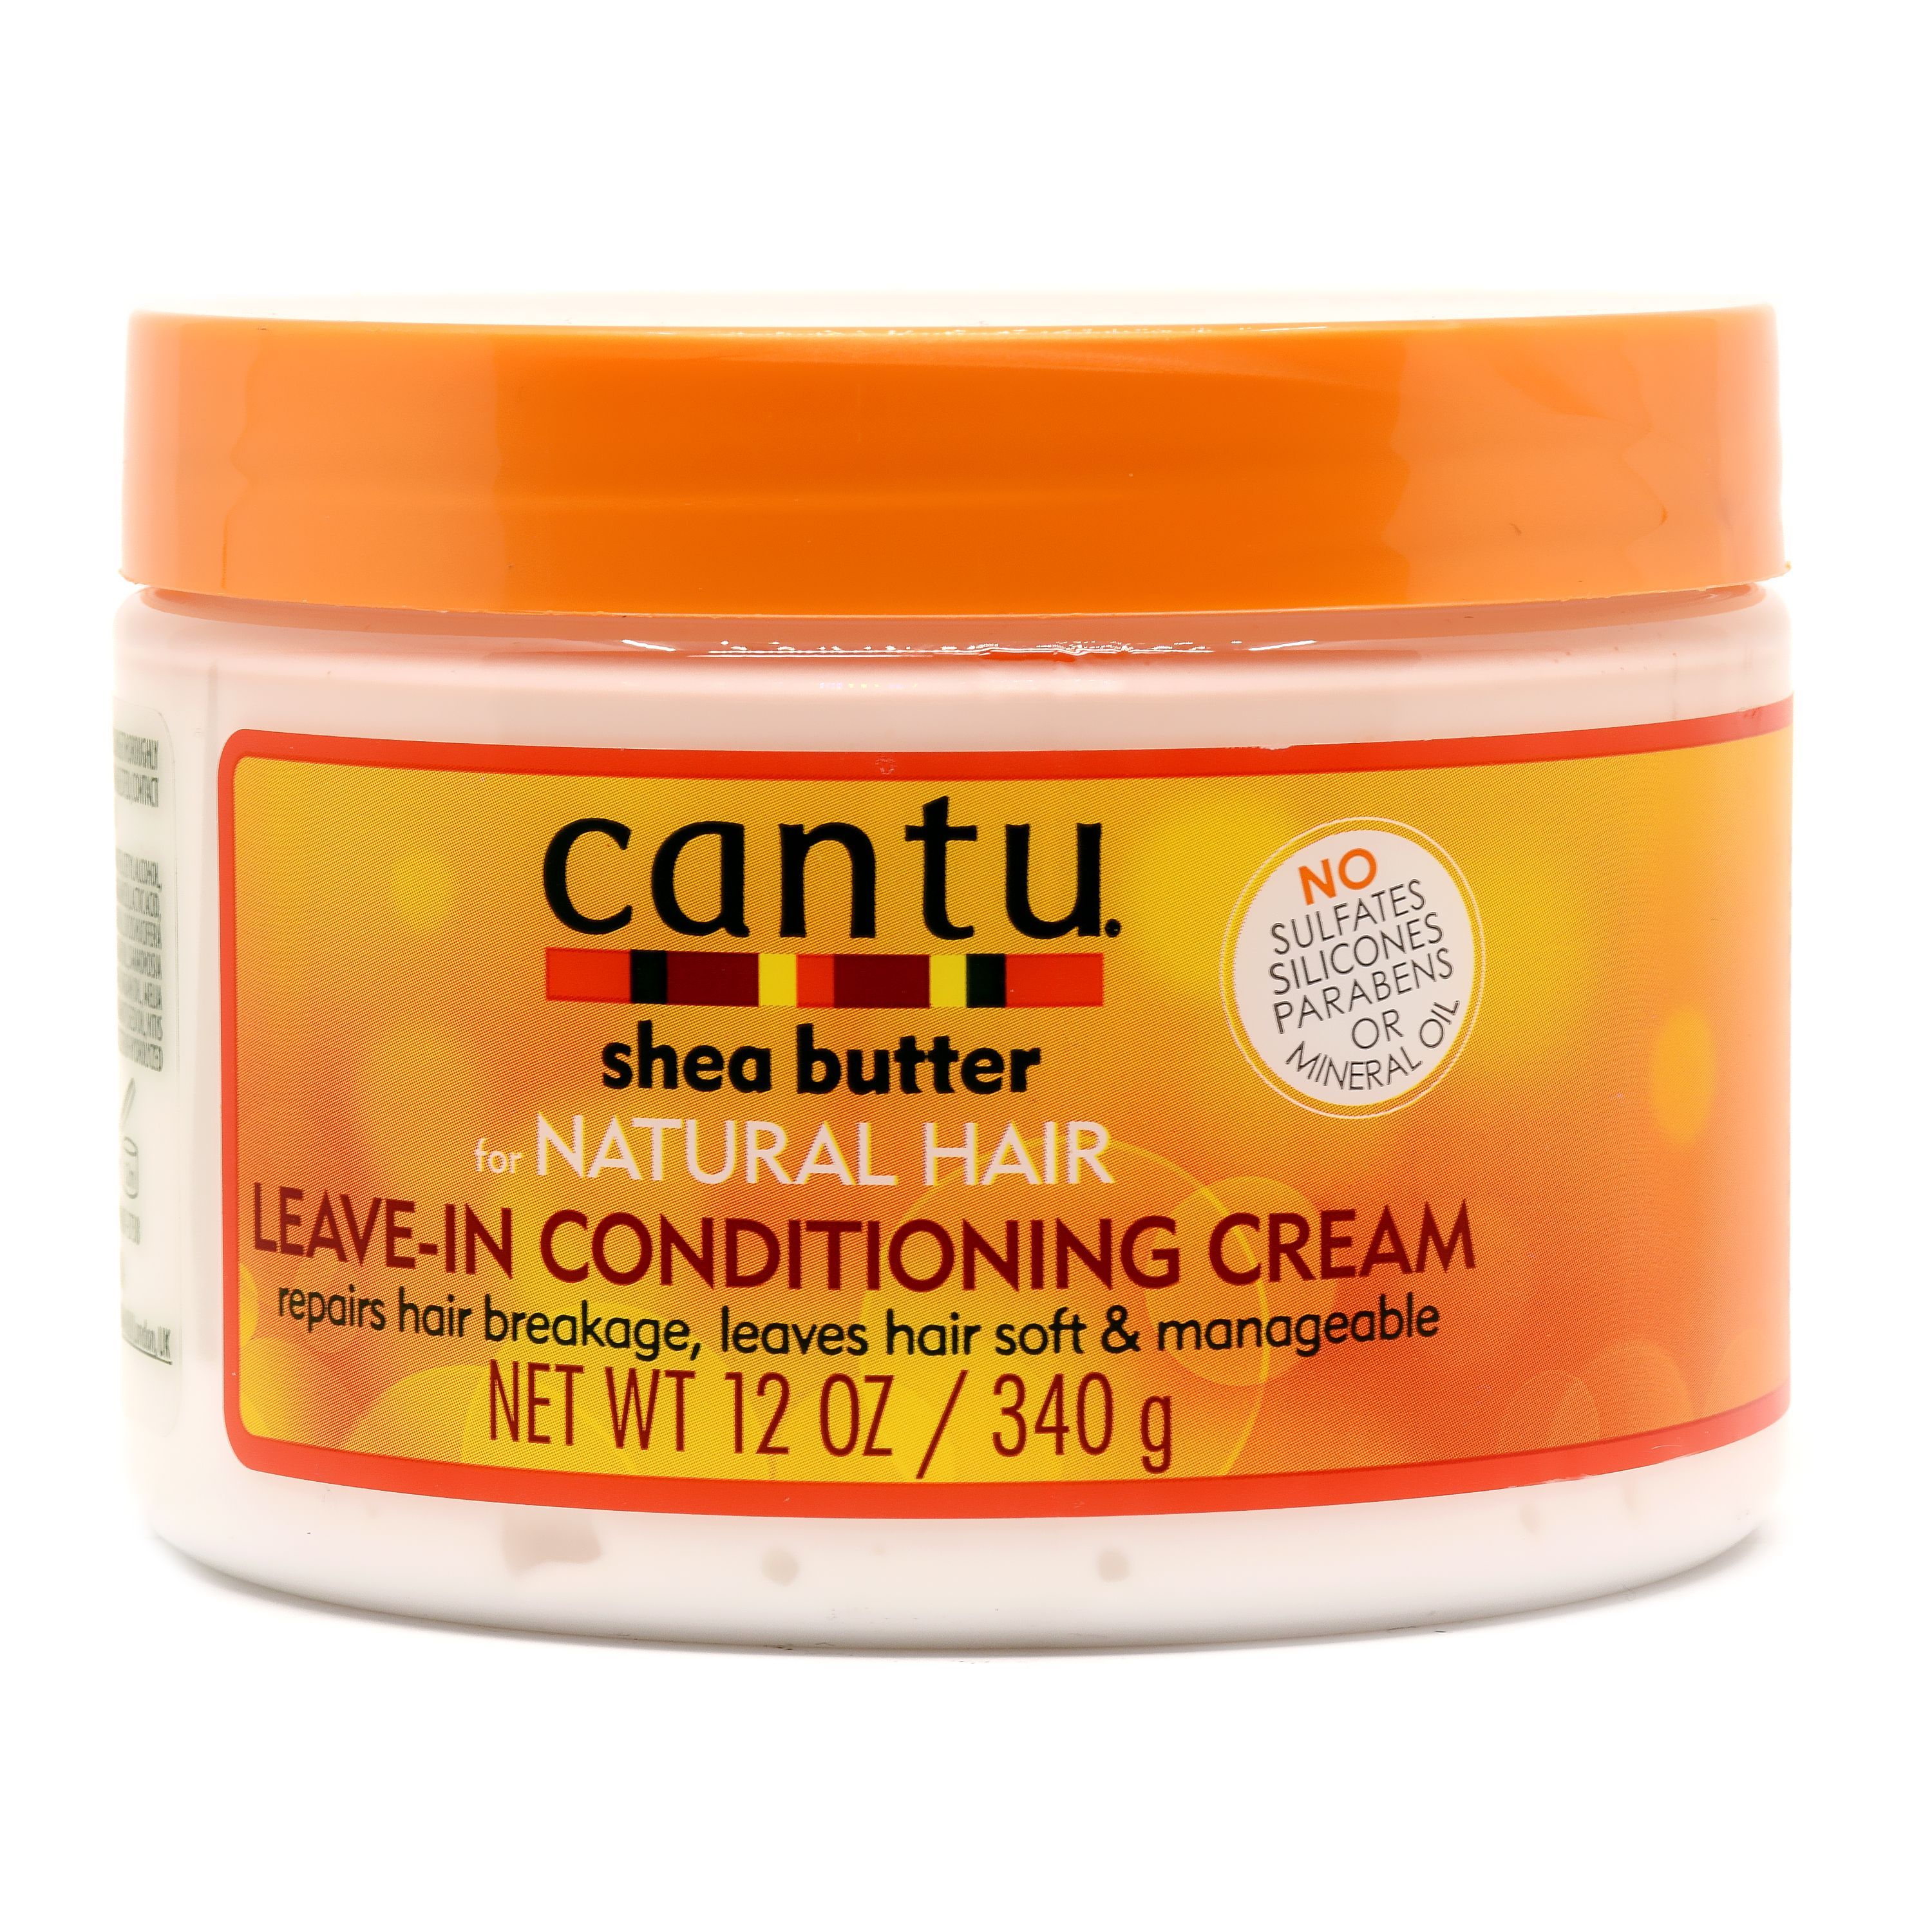 Cantu Shea Butter for Natural Hair Leave-in Conditioning Cream - 340g